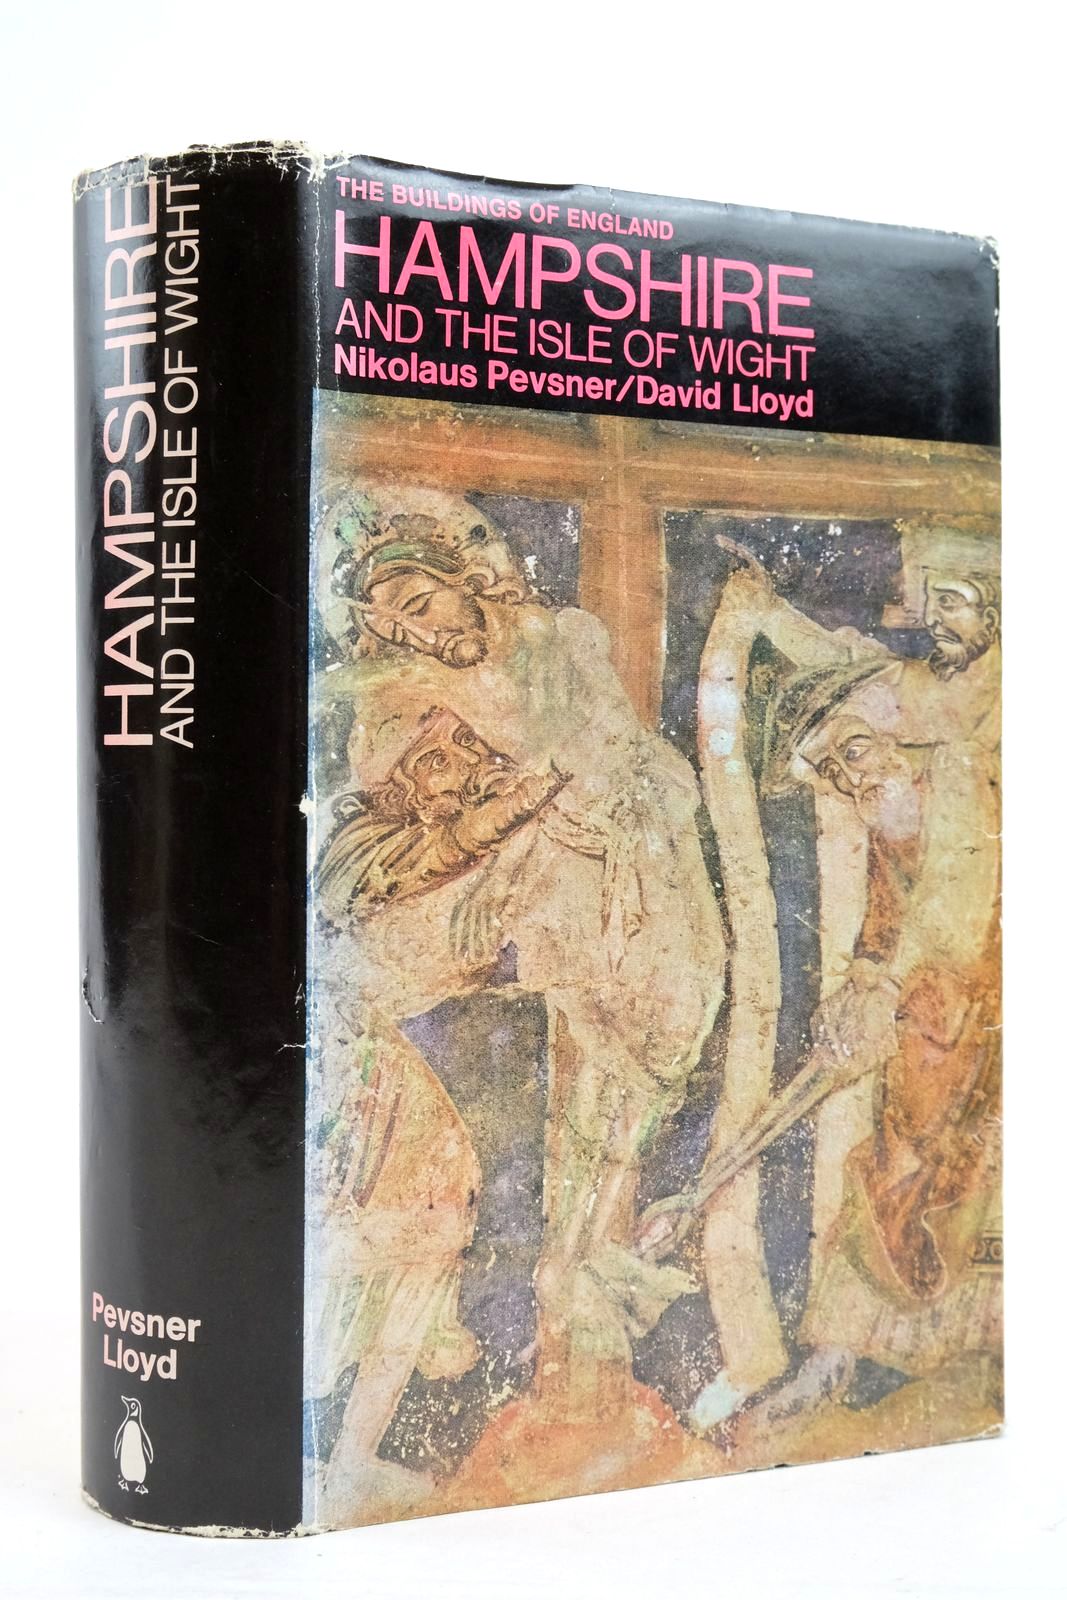 Photo of HAMPSHIRE AND THE ISLE OF WIGHT (BUILDINGS OF ENGLAND) written by Pevsner, Nikolaus Lloyd, David published by Penguin (STOCK CODE: 2135998)  for sale by Stella & Rose's Books